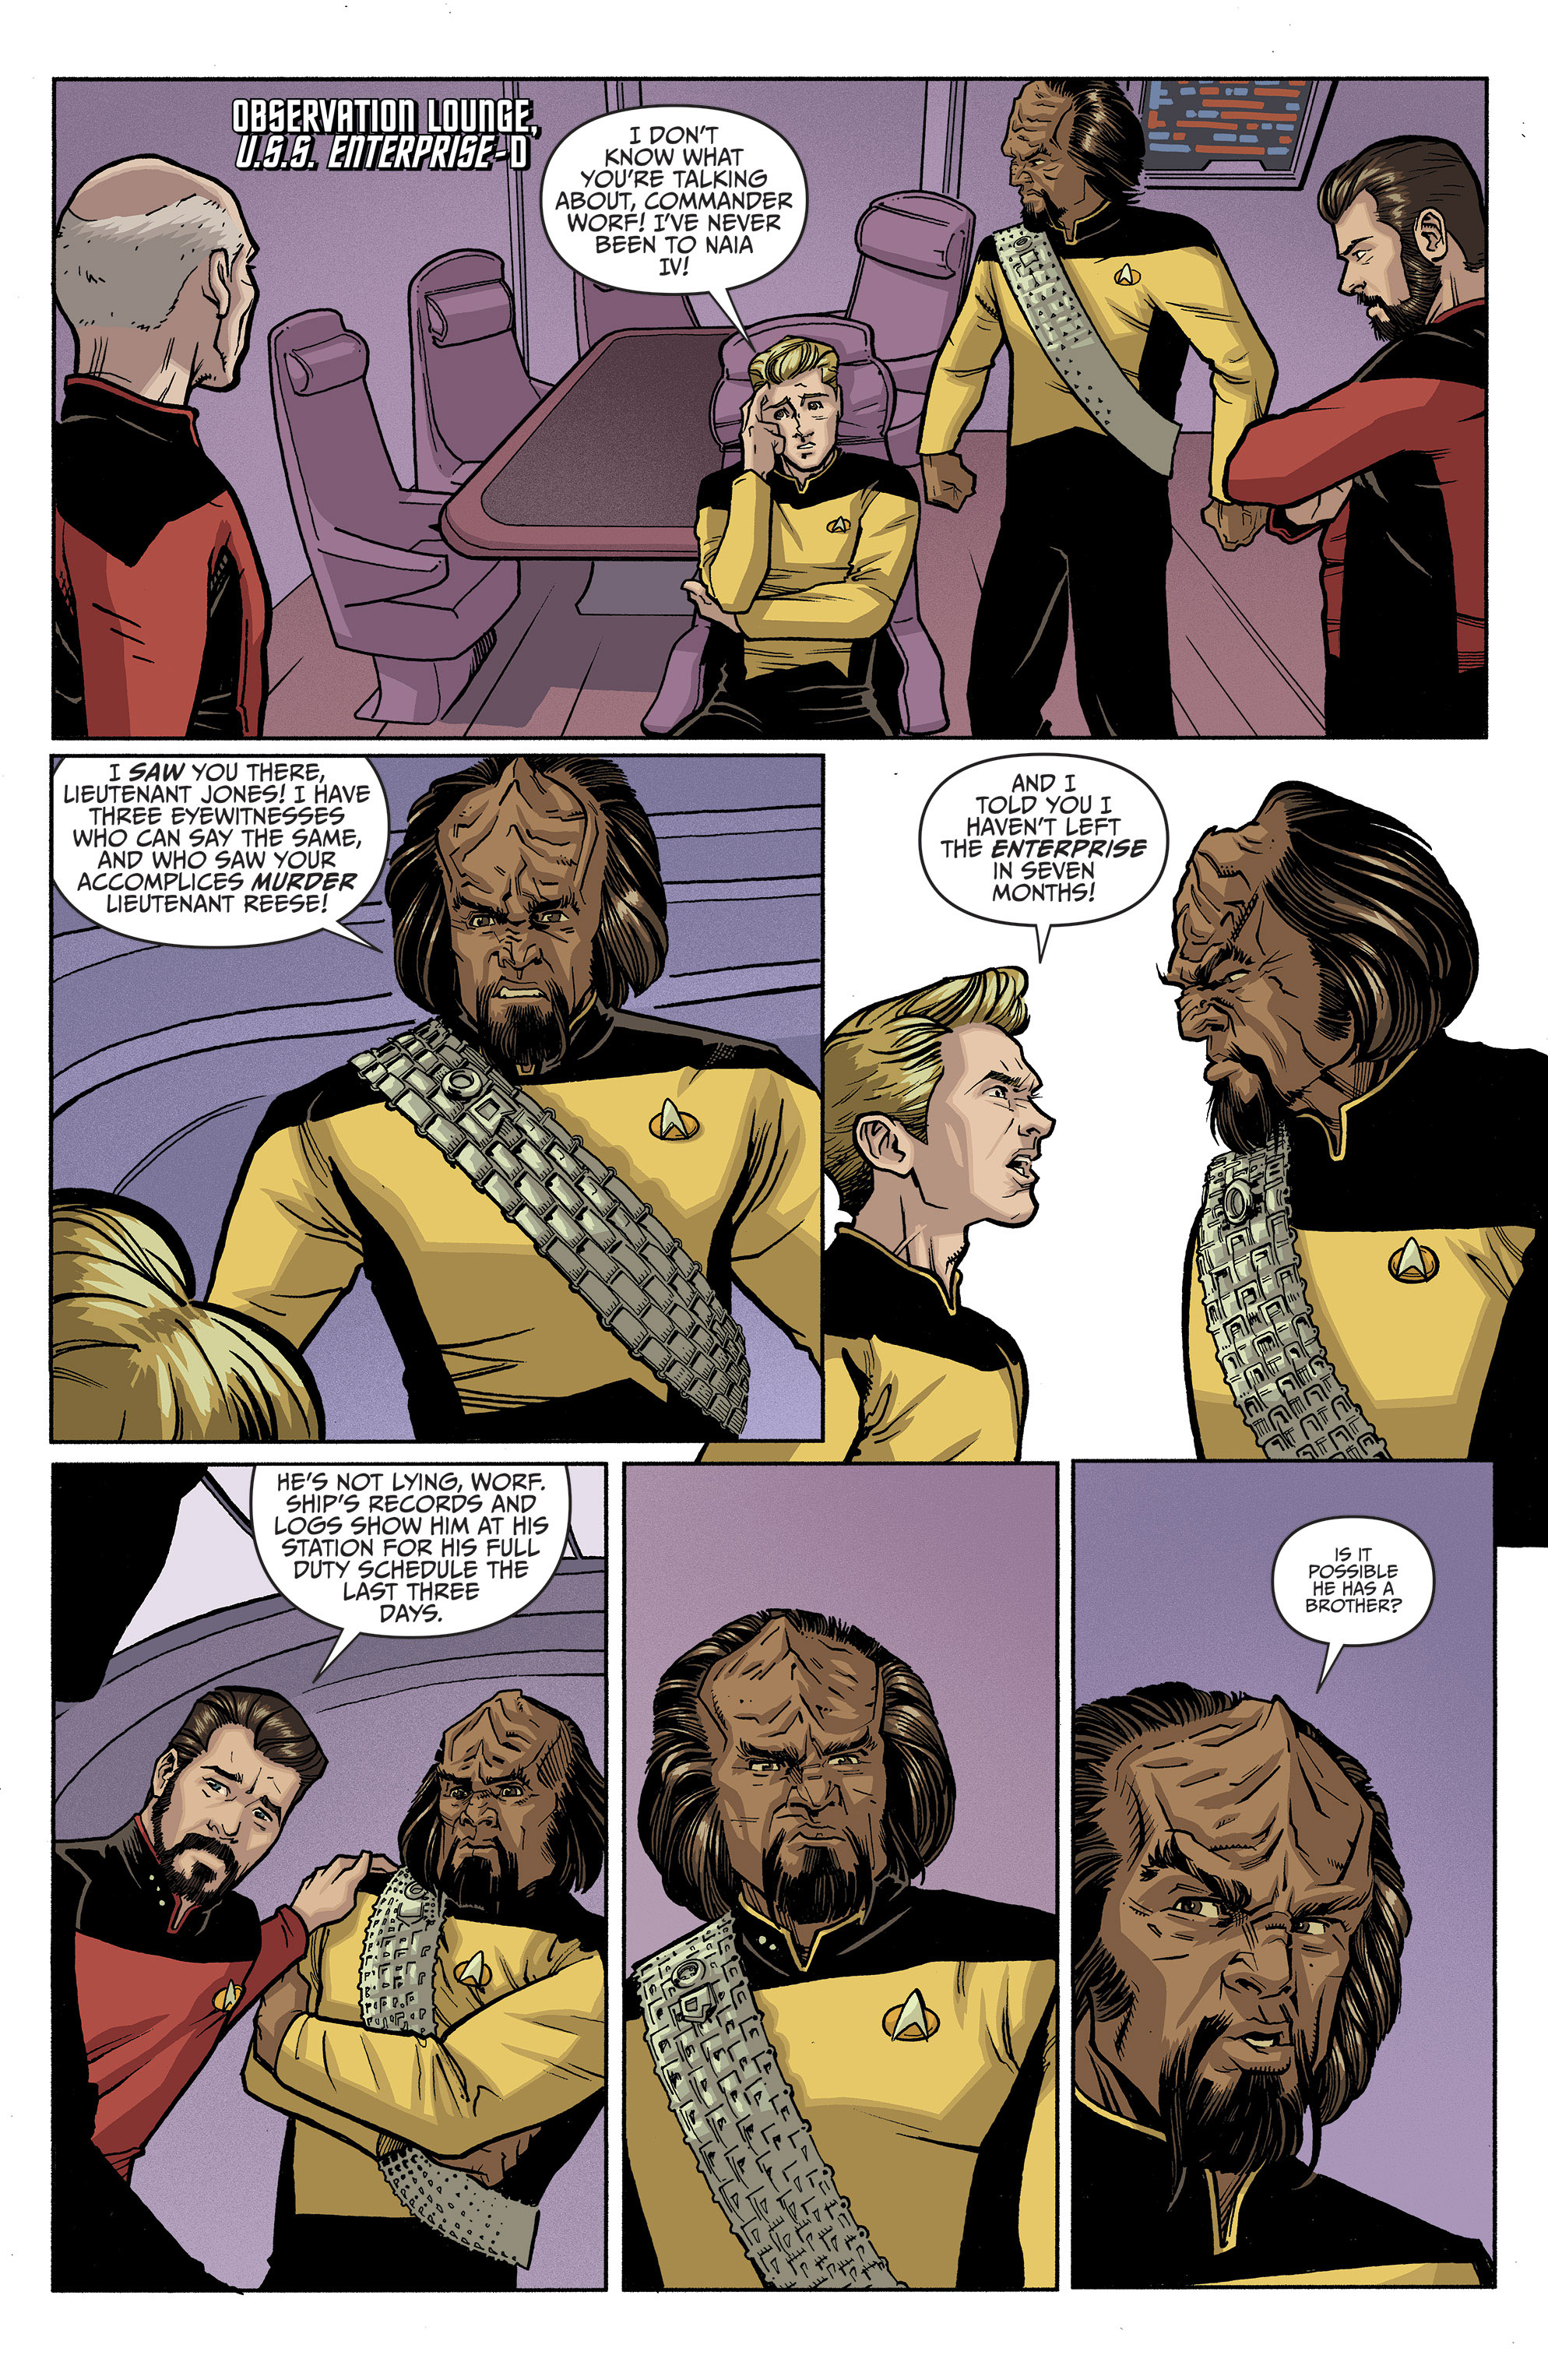 Star Trek: The Next Generation: Through The Mirror (2018-): Chapter 2 - Page 3